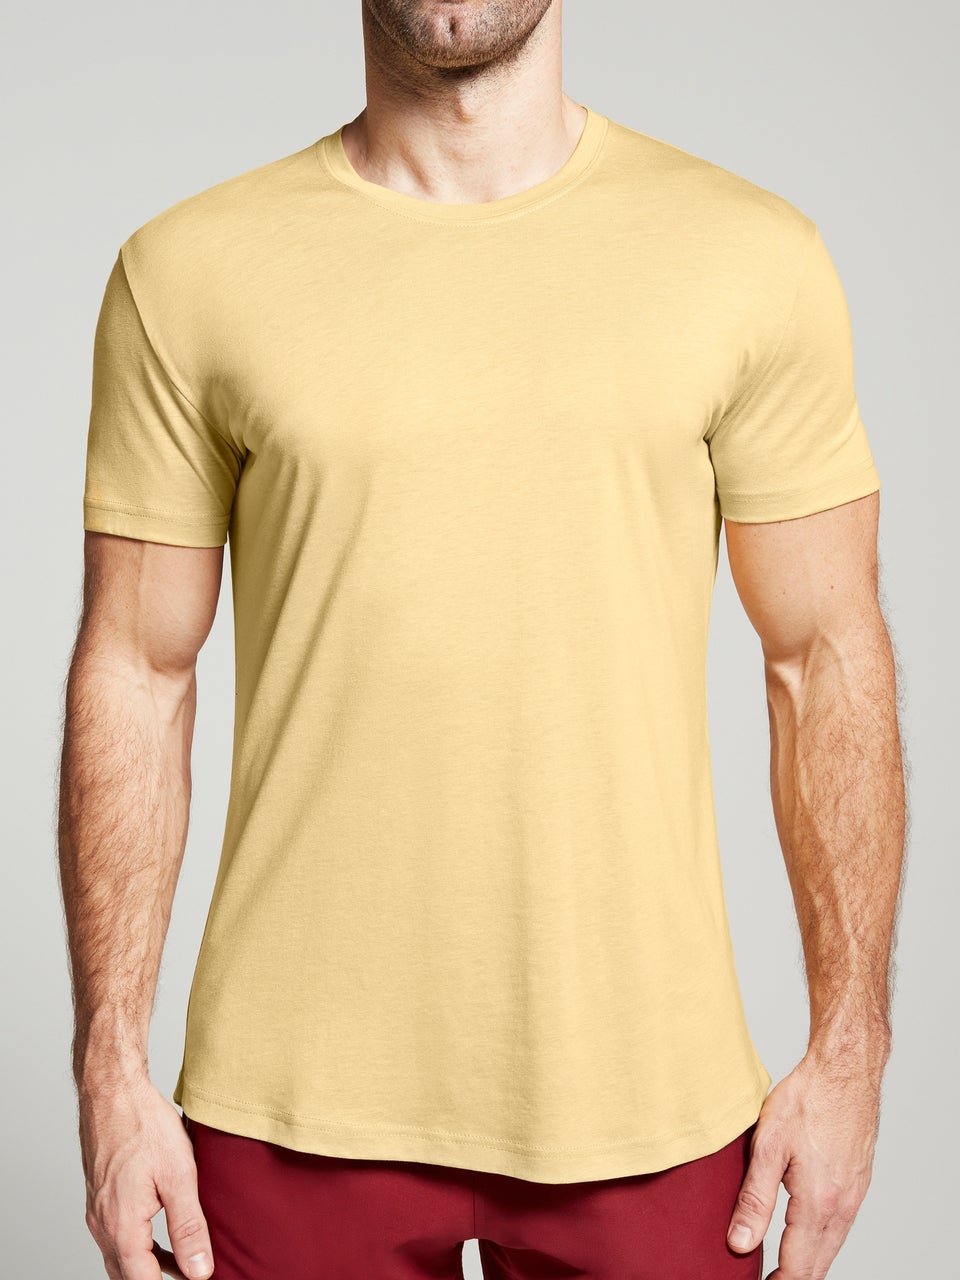 'The Actor' T-shirt - Sand